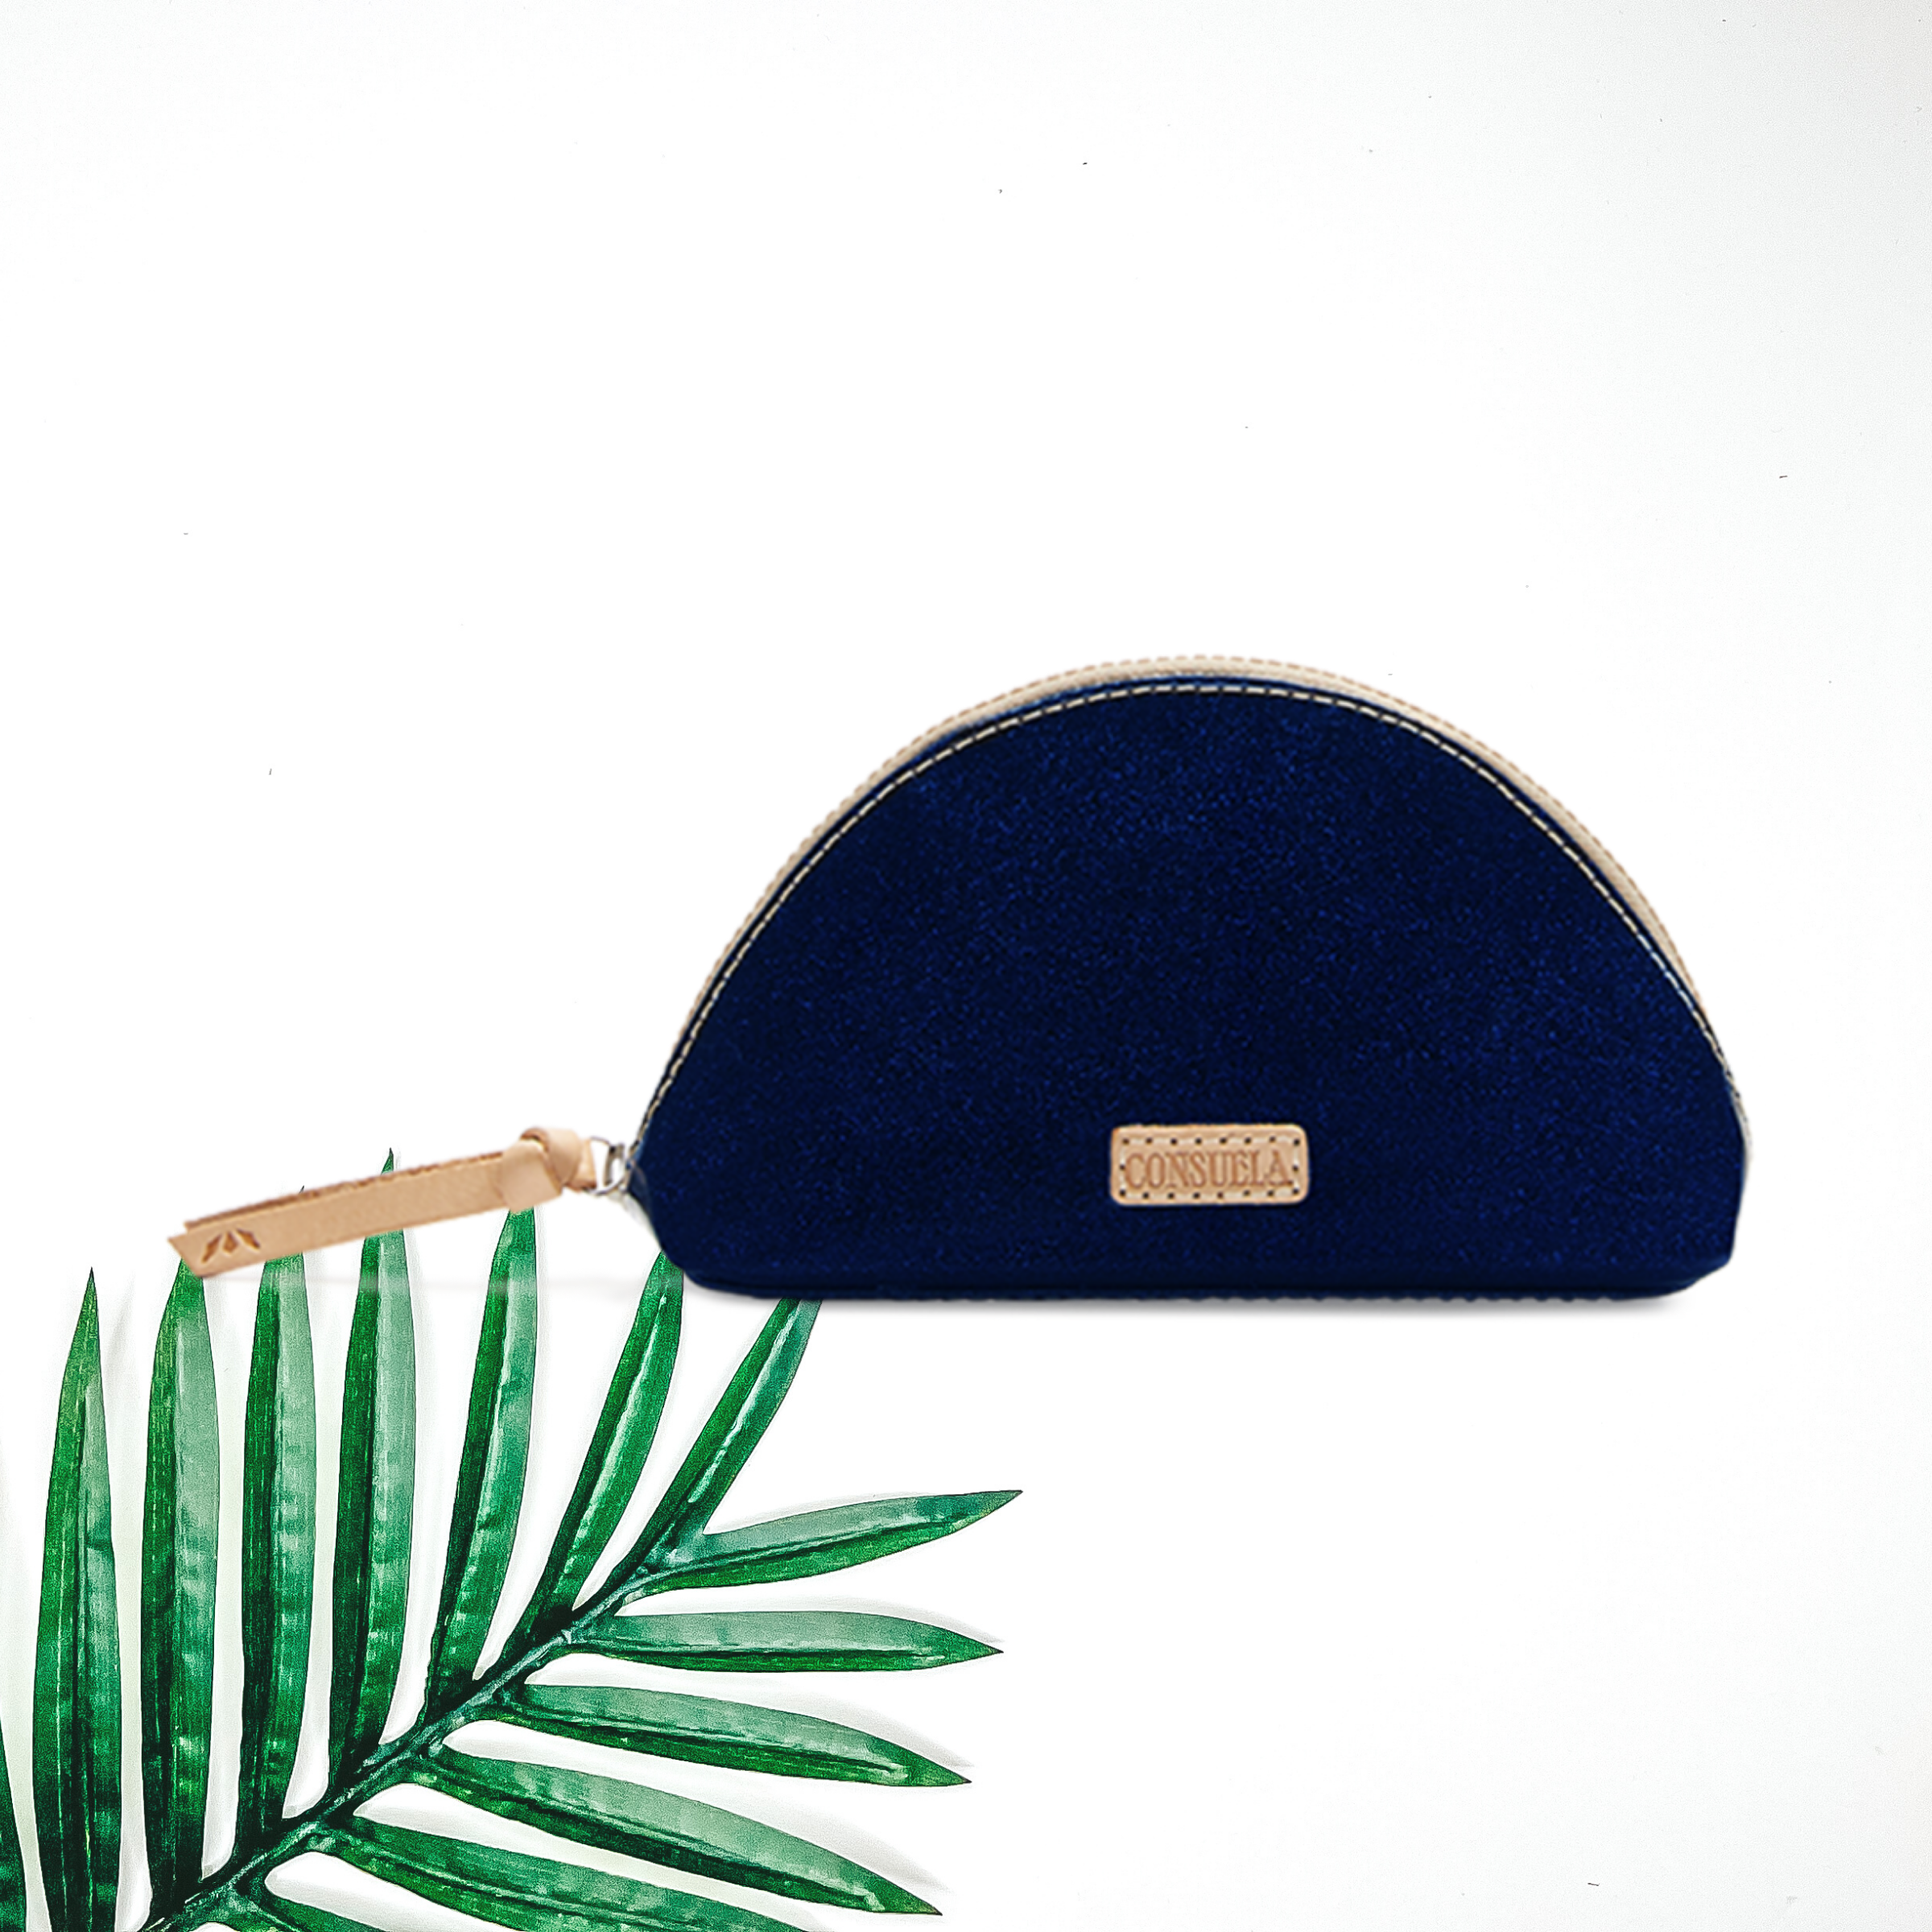 Centered in the picture is a medium sized cosmetic case in a sparkly blue. A palm leaf is on the  bottom right, on a white background.  